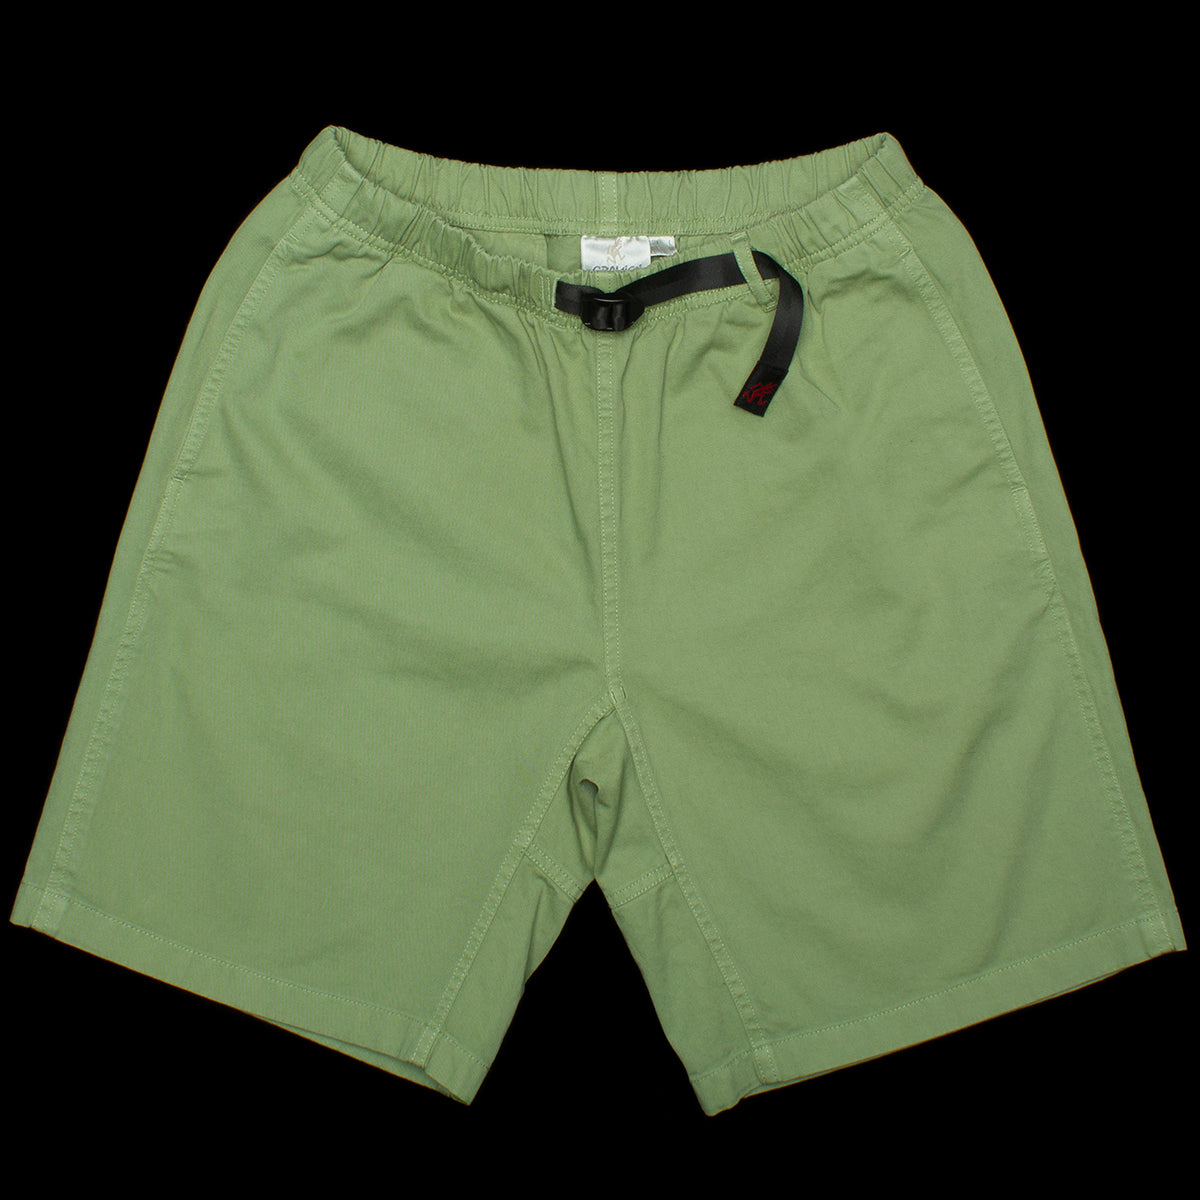 Gramicci G-Short Style # G101-OGT Color : Smokey Mint